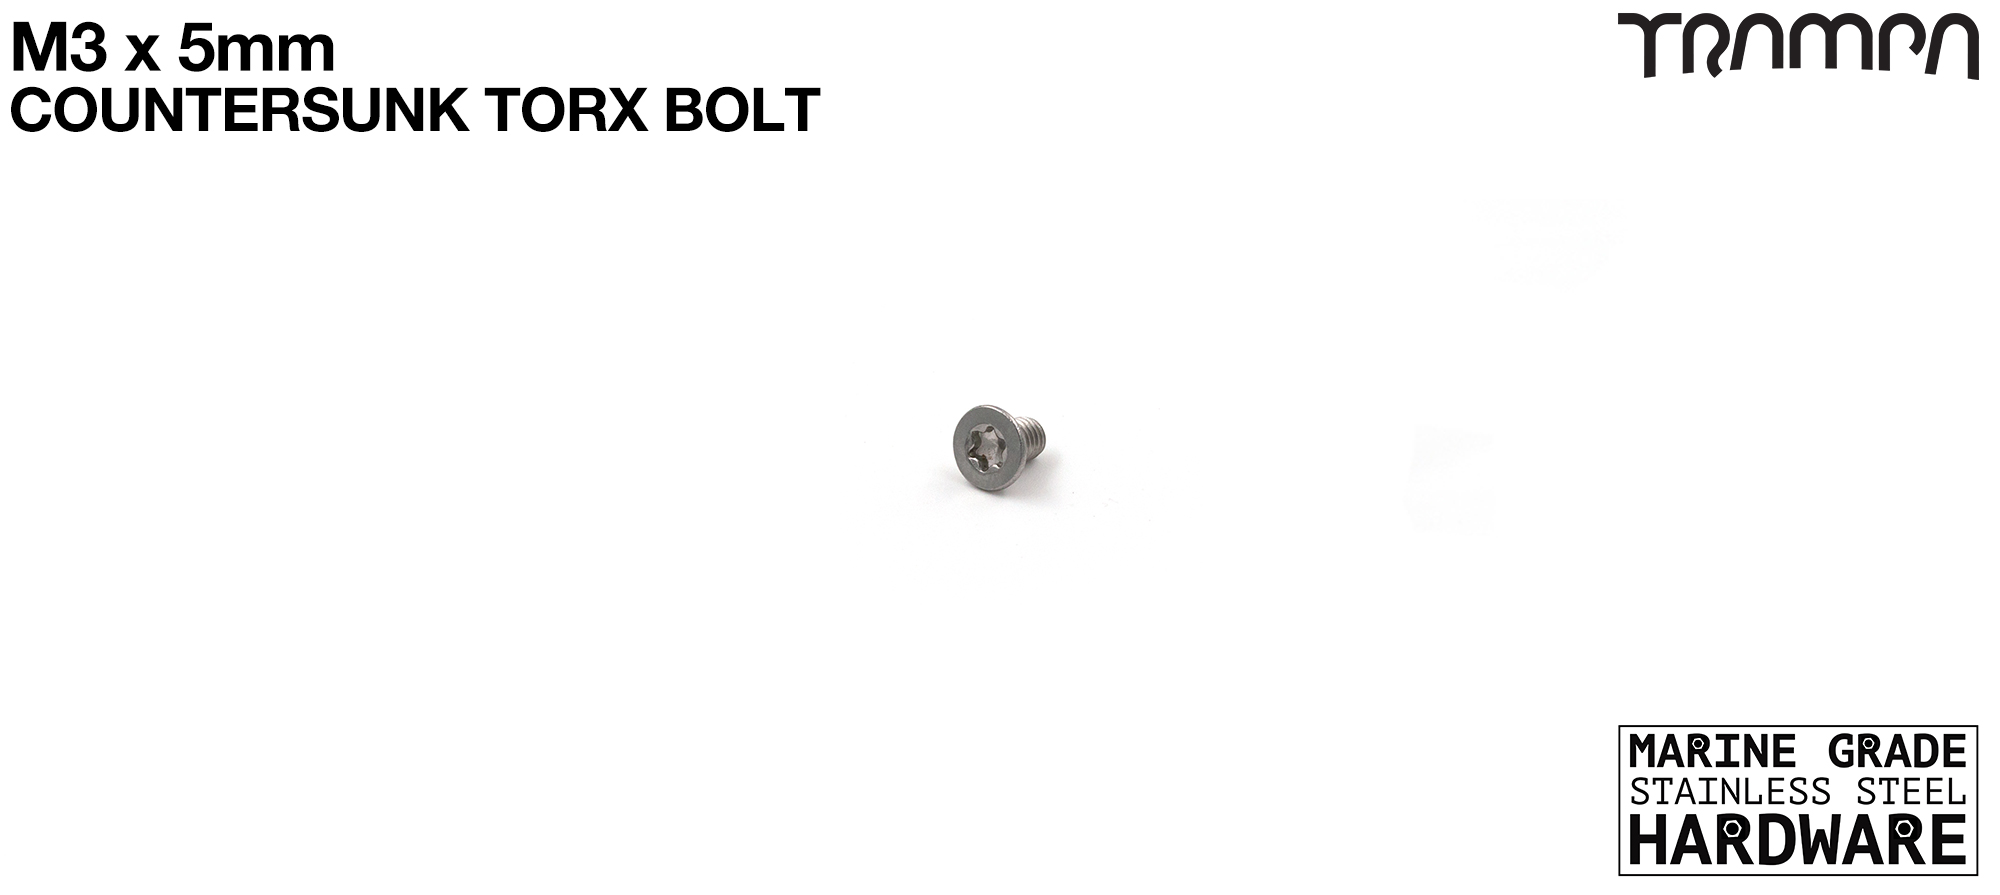 M3 x 5mm TORX Countersunk Bolt - Marine Grade Stainless steel with TORX Fitting